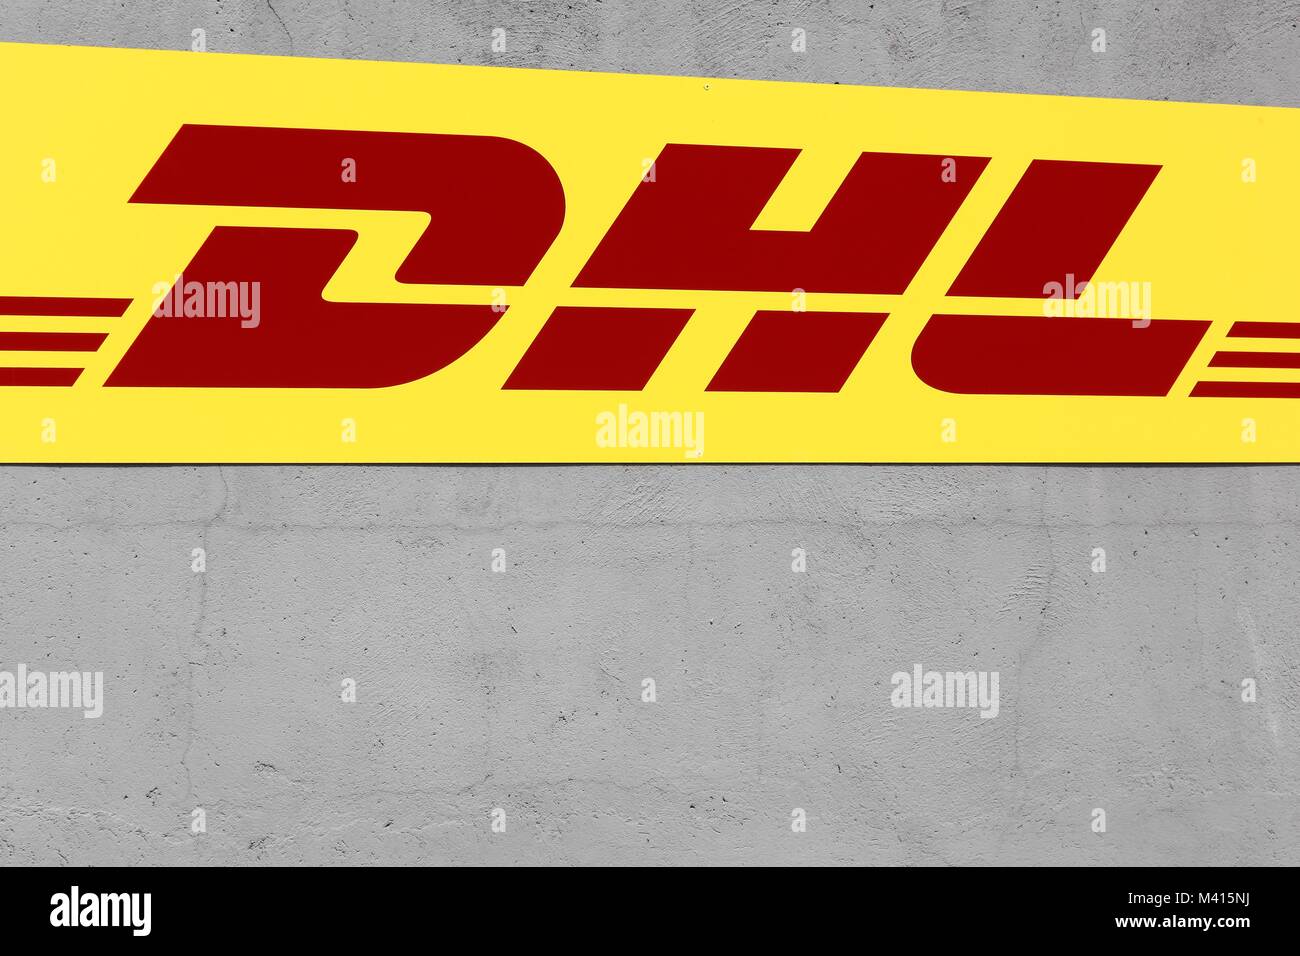 Sassenage, France - June 24, 2017: DHL logo on a facade. DHL Express is a division of the german logistics company Deutsche Post Stock Photo